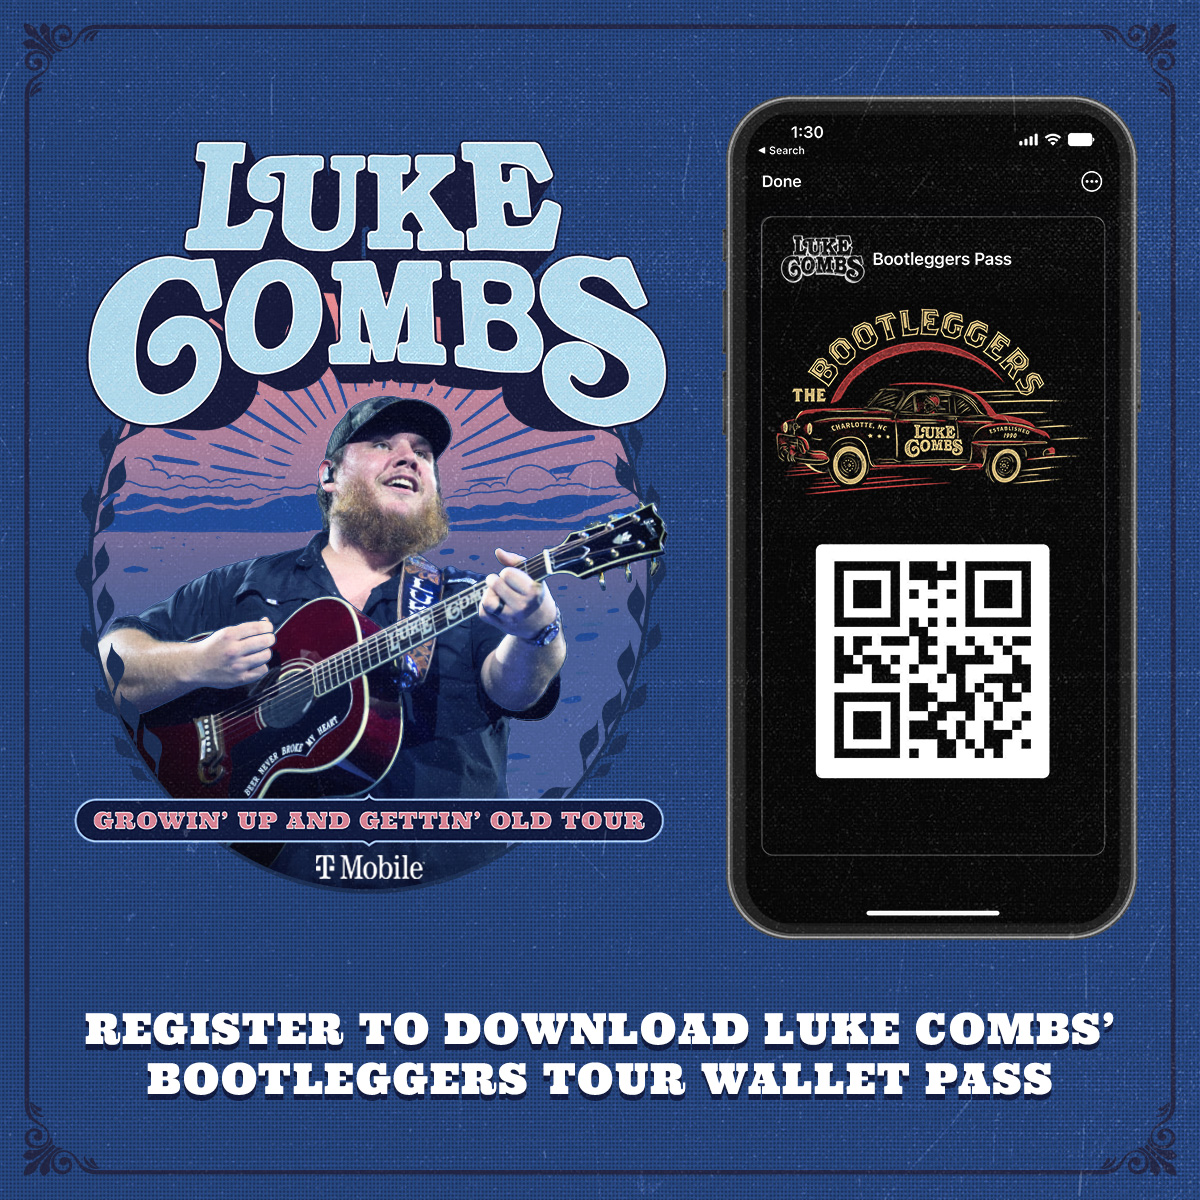 Coming to Luke Combs? Register for the Bootleggers tour wallet pass for select offers such as ticket upgrades, merch fast lanes and more! You must be part of the Bootleggers fan club and have a concert ticket to qualify for the pass. Details: bootleggerslive.com.